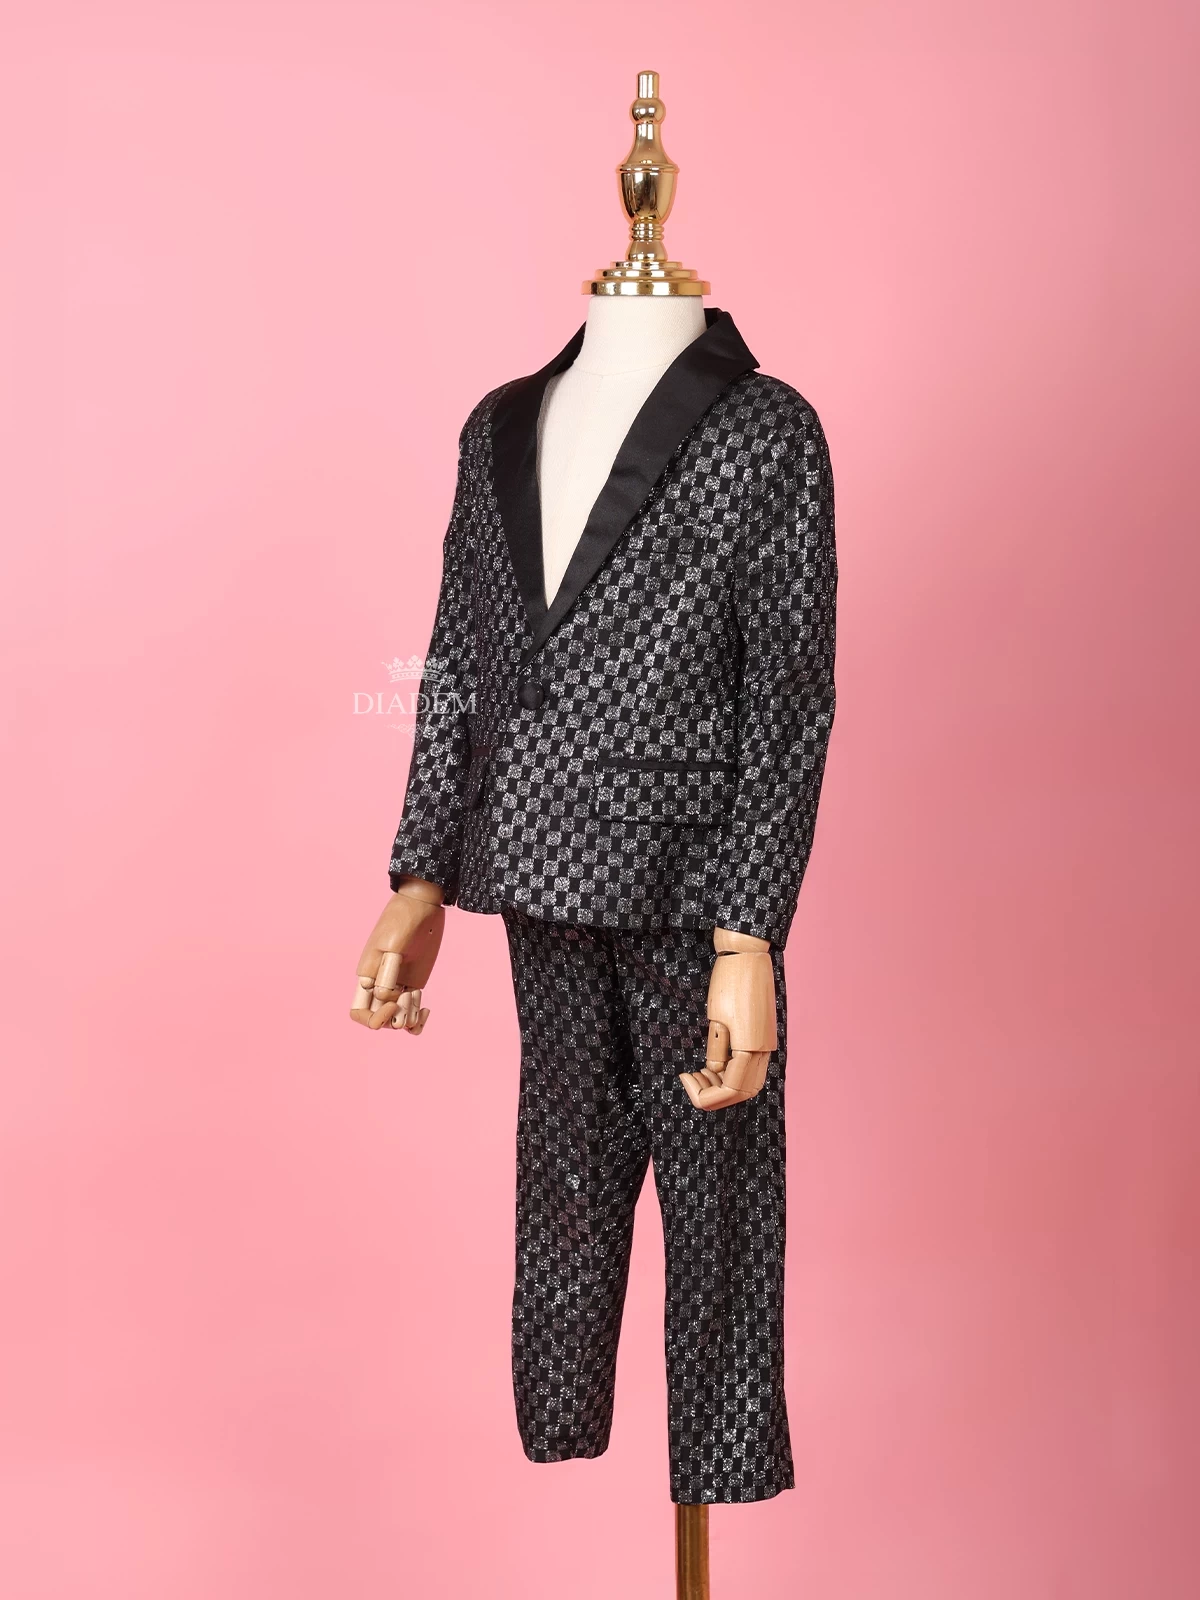 Black And Silver Shimmer Tuxedo With Checked Pattern Coat Suit For Boys